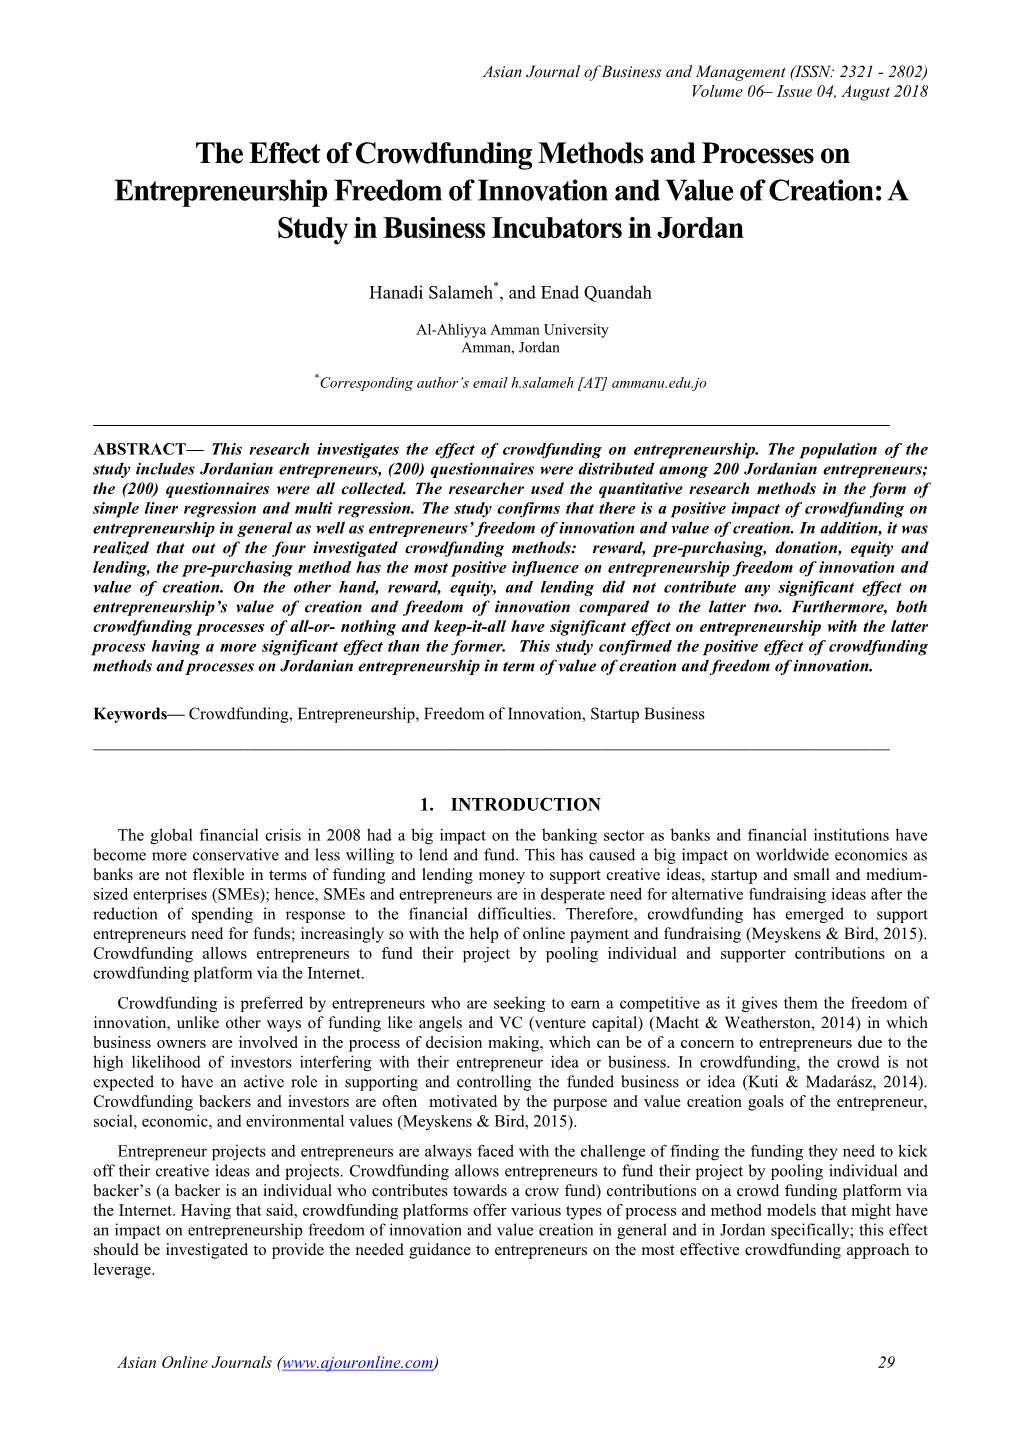 The Effect of Crowdfunding Methods and Processes on Entrepreneurship Freedom of Innovation and Value of Creation: a Study in Business Incubators in Jordan